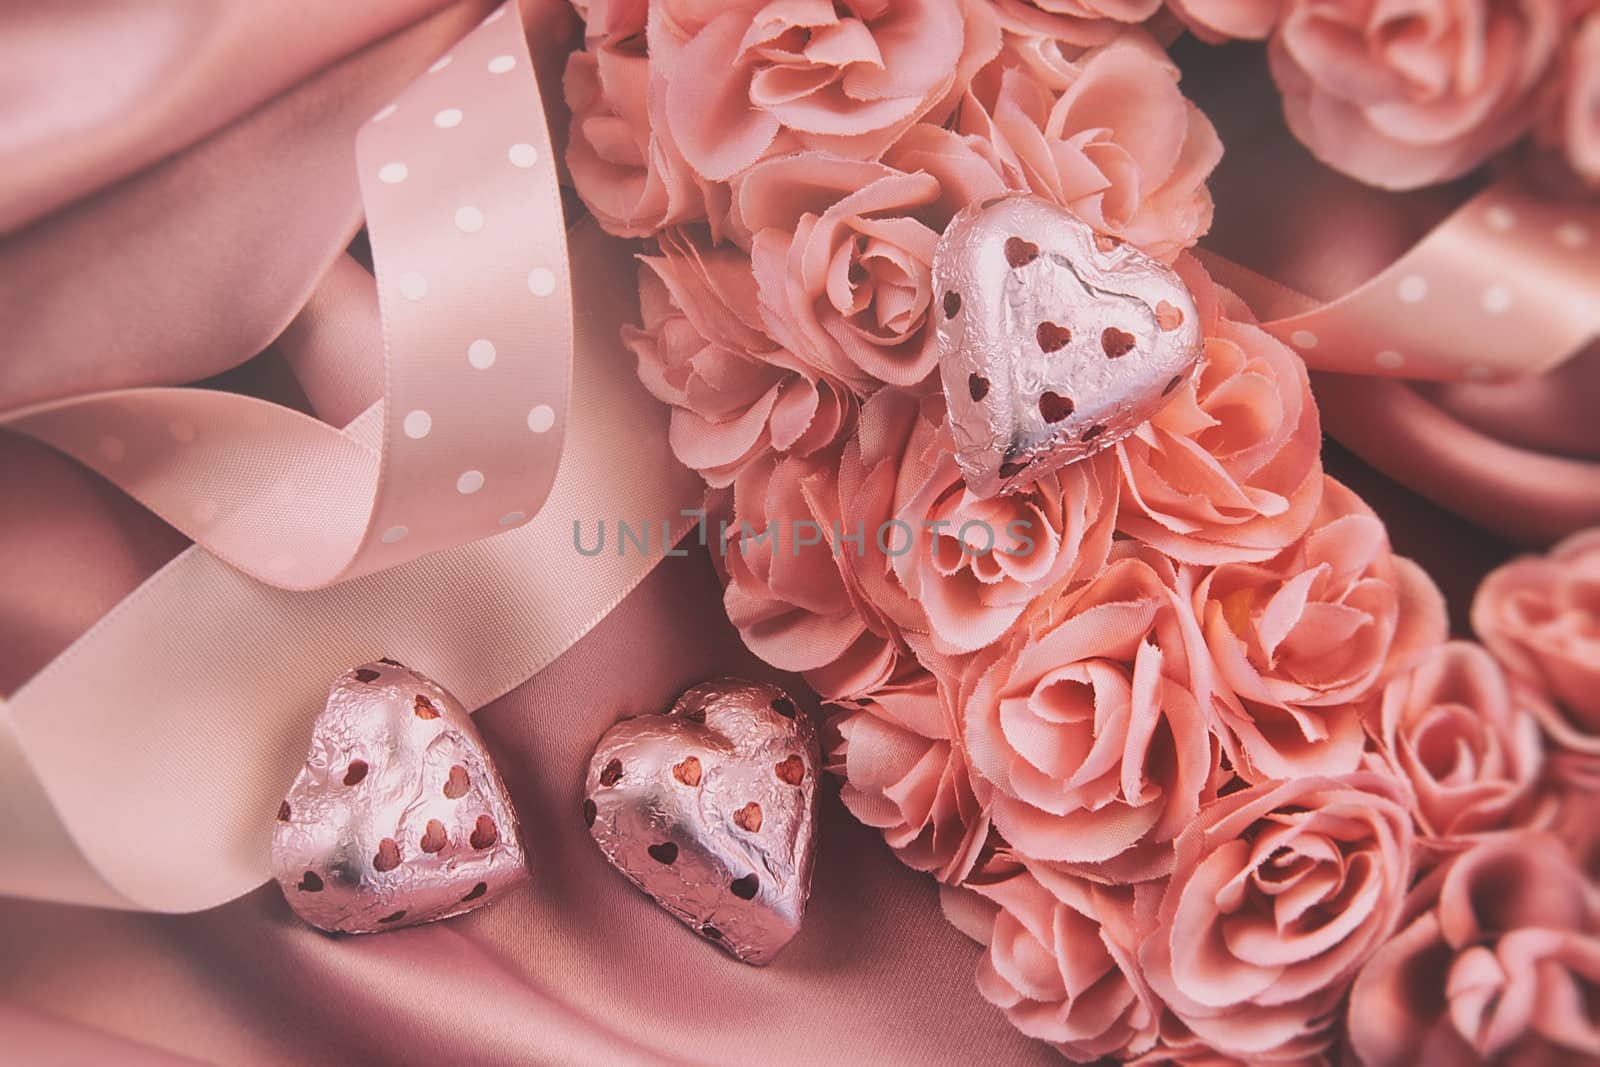 Heart made of pink roses with ribbons and chocolates on satin